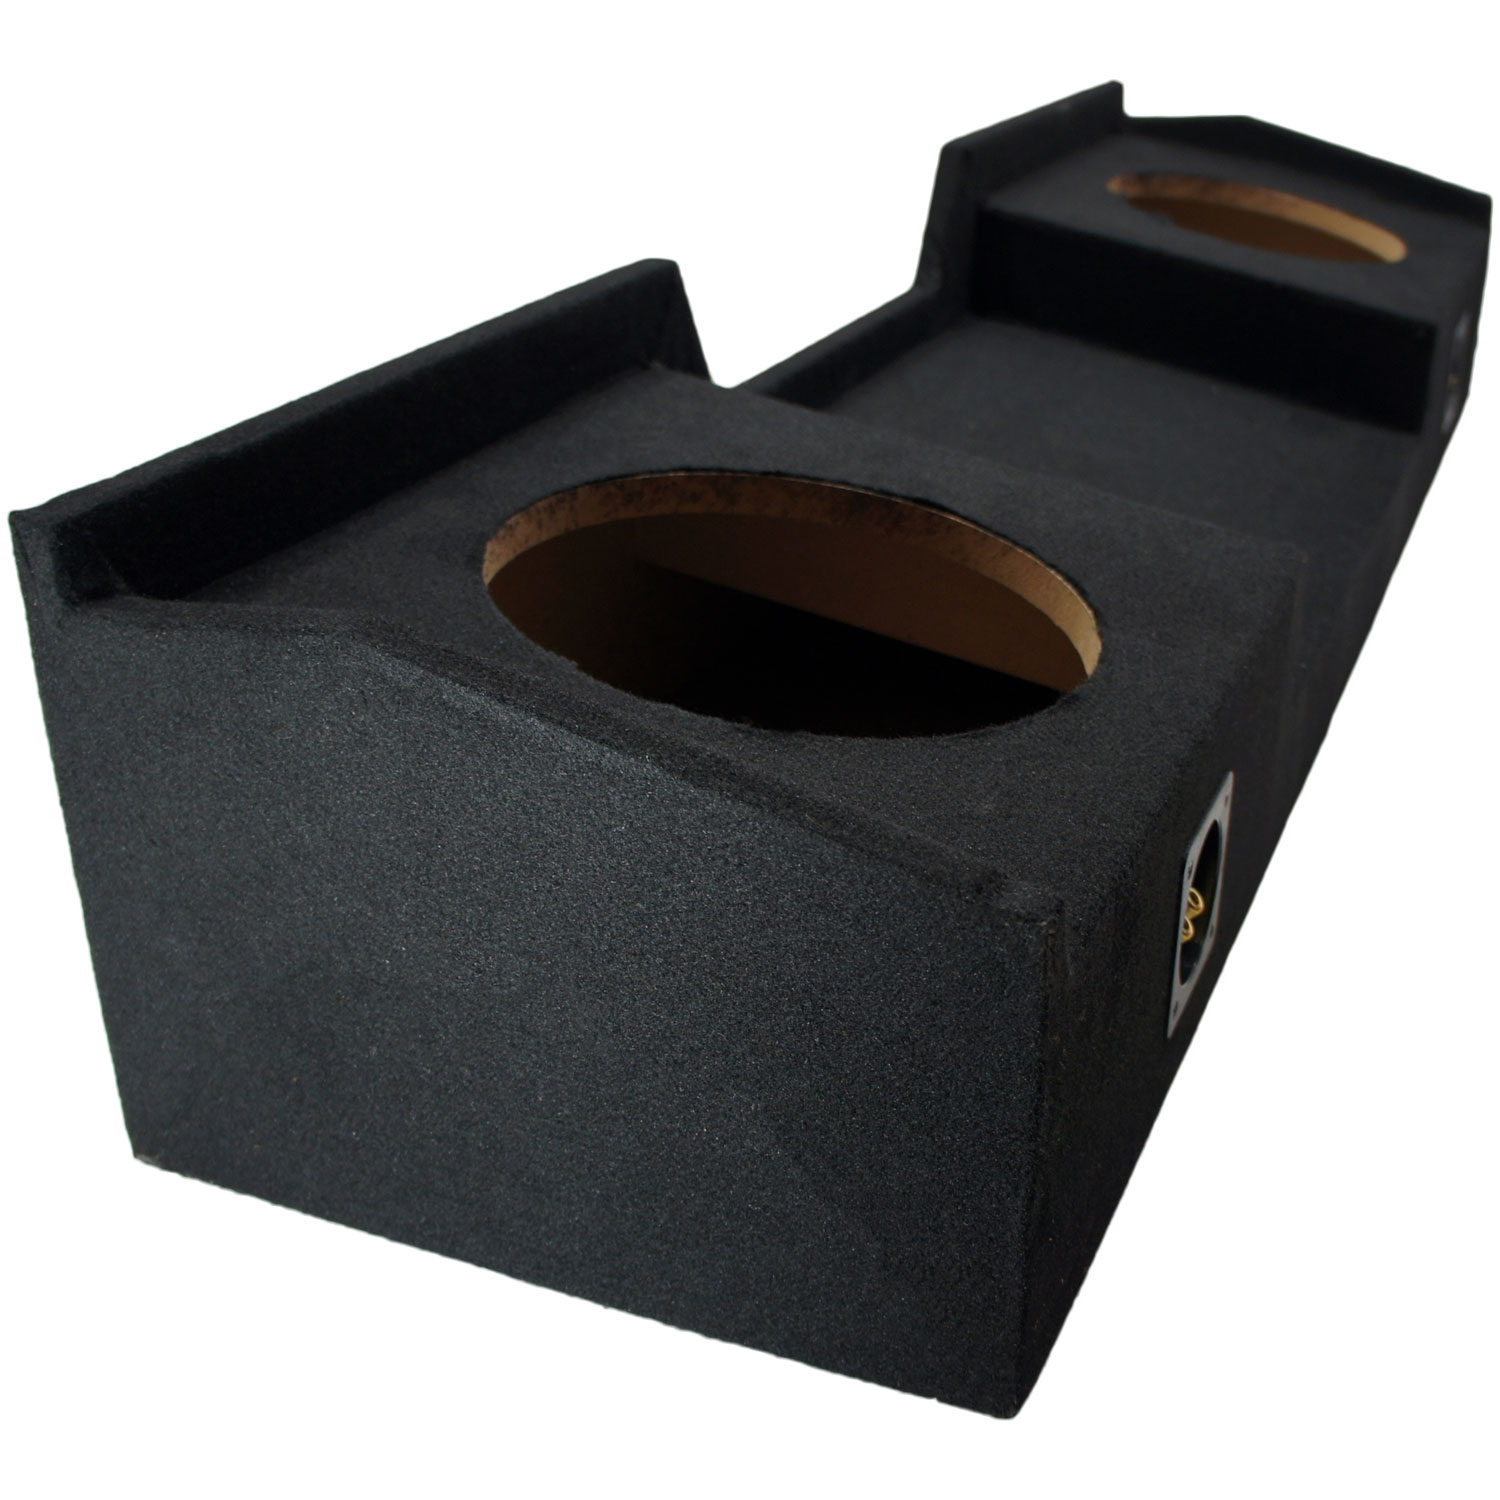 Compatible with 1999-2006 Chevy Silverado Extended Cab Truck Harmony Bundle R104 Dual 10 Sub Box & HA-A400.1 